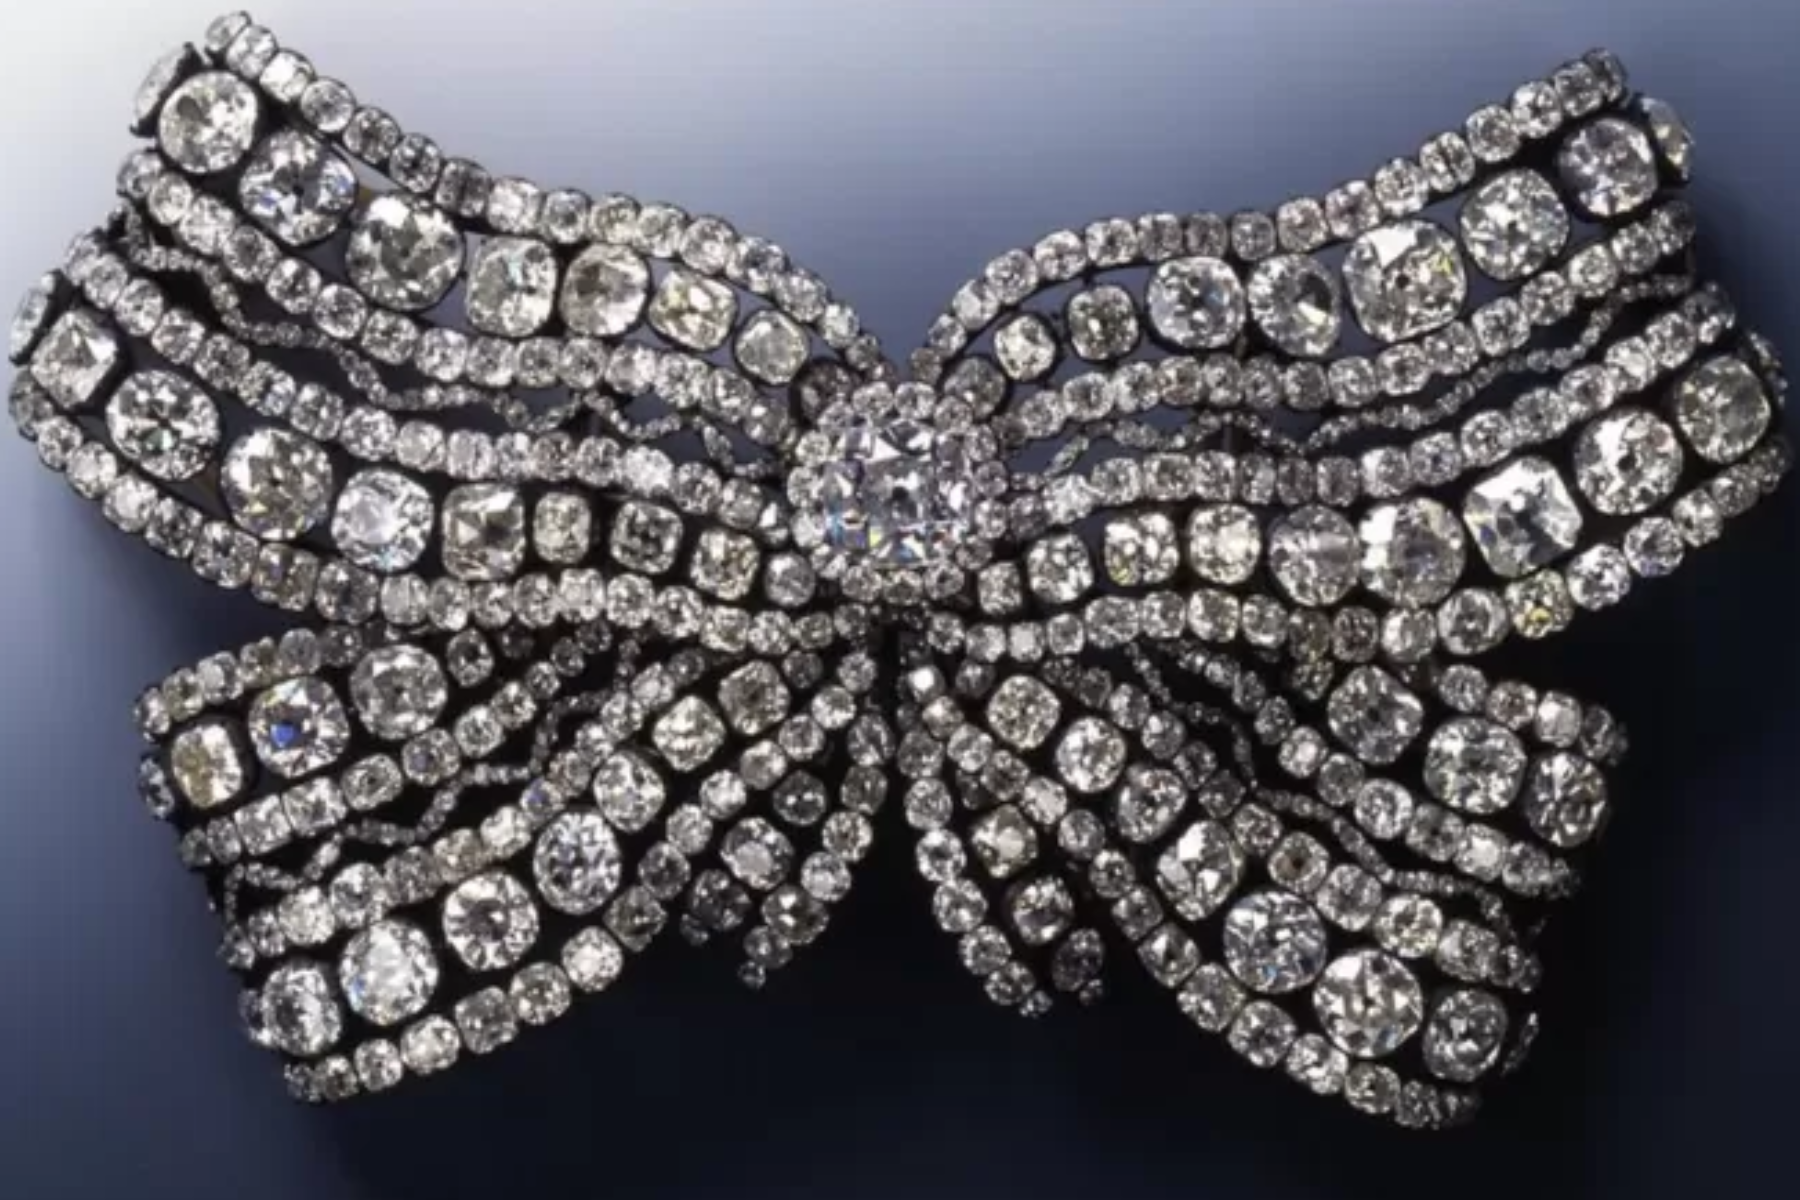 A large diamond-encrusted breast bow that was stolen from the historic Green Vault in November 2019